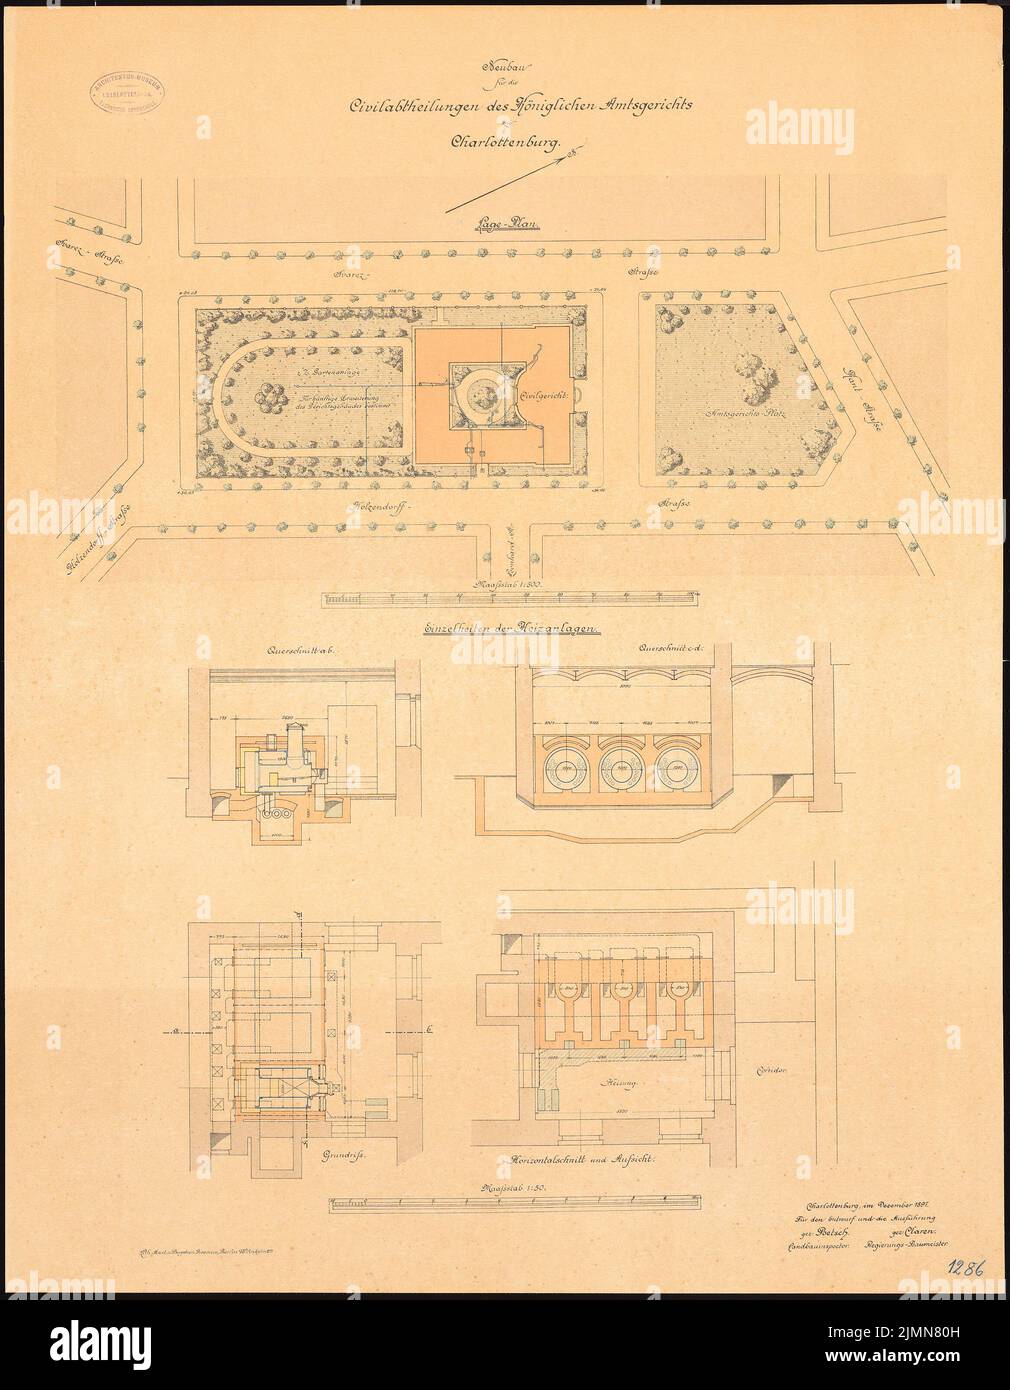 Poetsch Otto (1848-1915), District Court Berlin-Charlottenburg. Civil departments (1895-1897): Department 1: 500, details of the heating systems: floor plan, supervision, cross-sections 1:50. Lithograph, 78.2 x 60.8 cm (including scan edges) Stock Photo